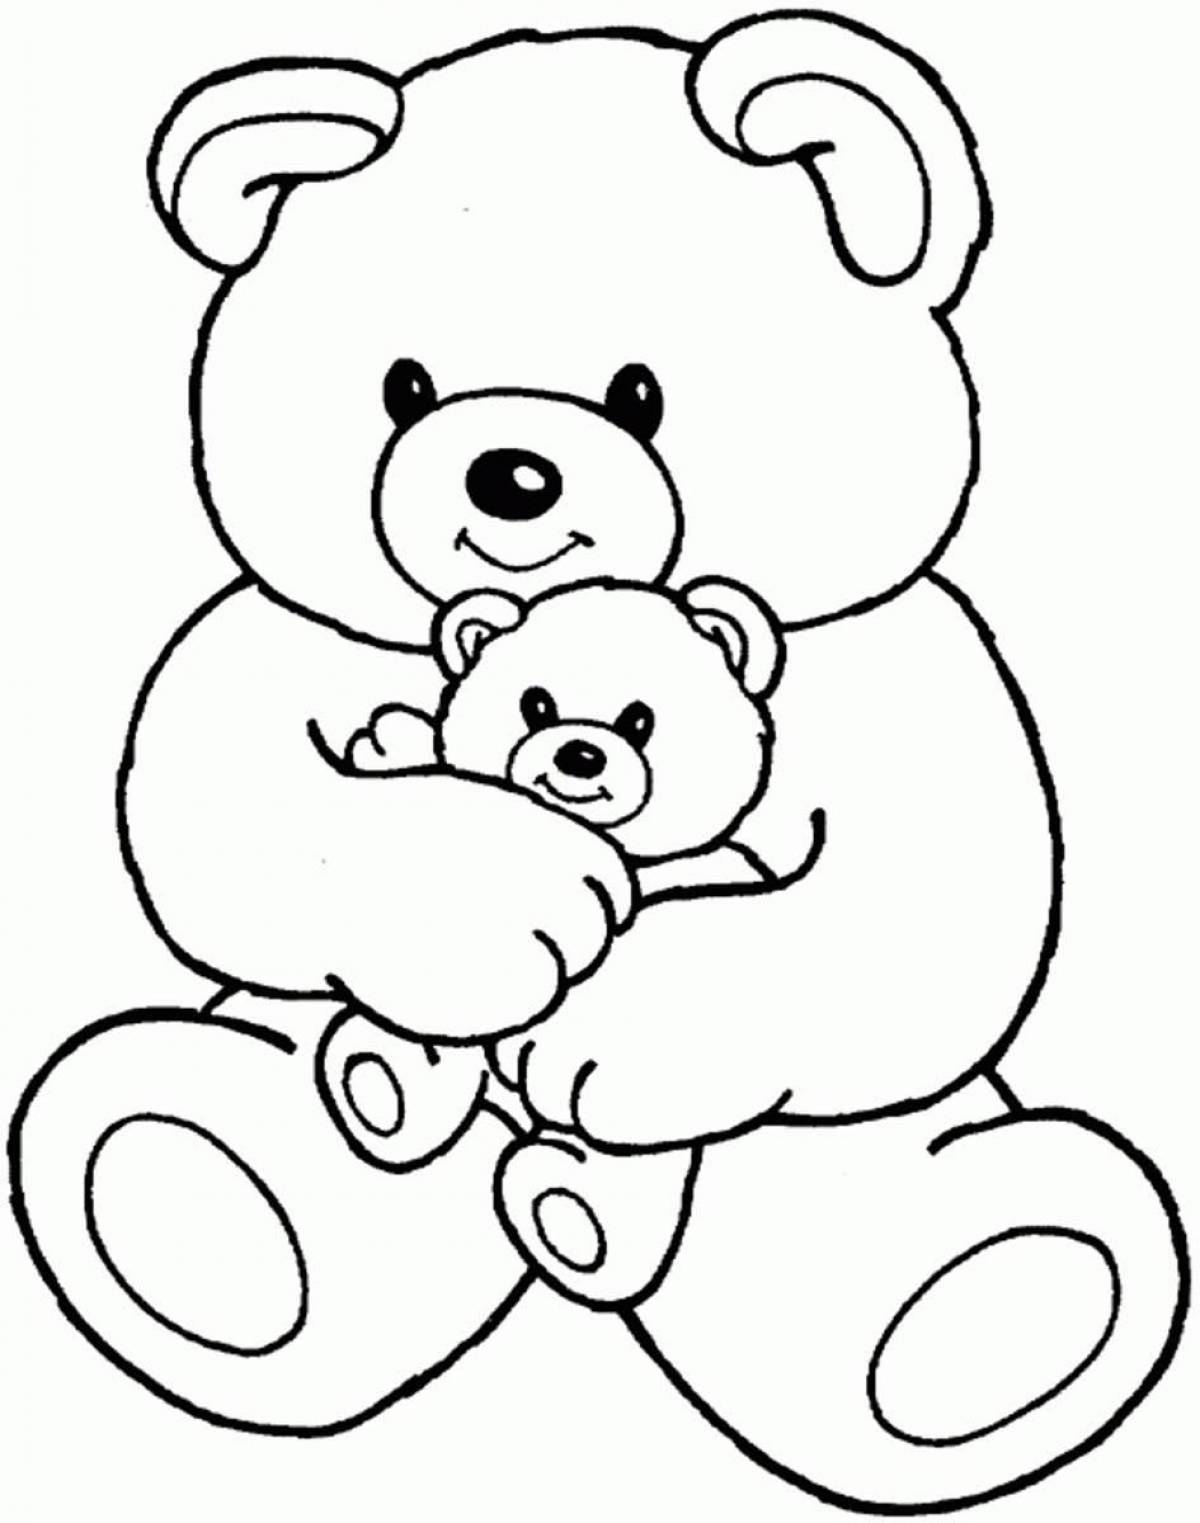 Colorful and cute teddy bear coloring book